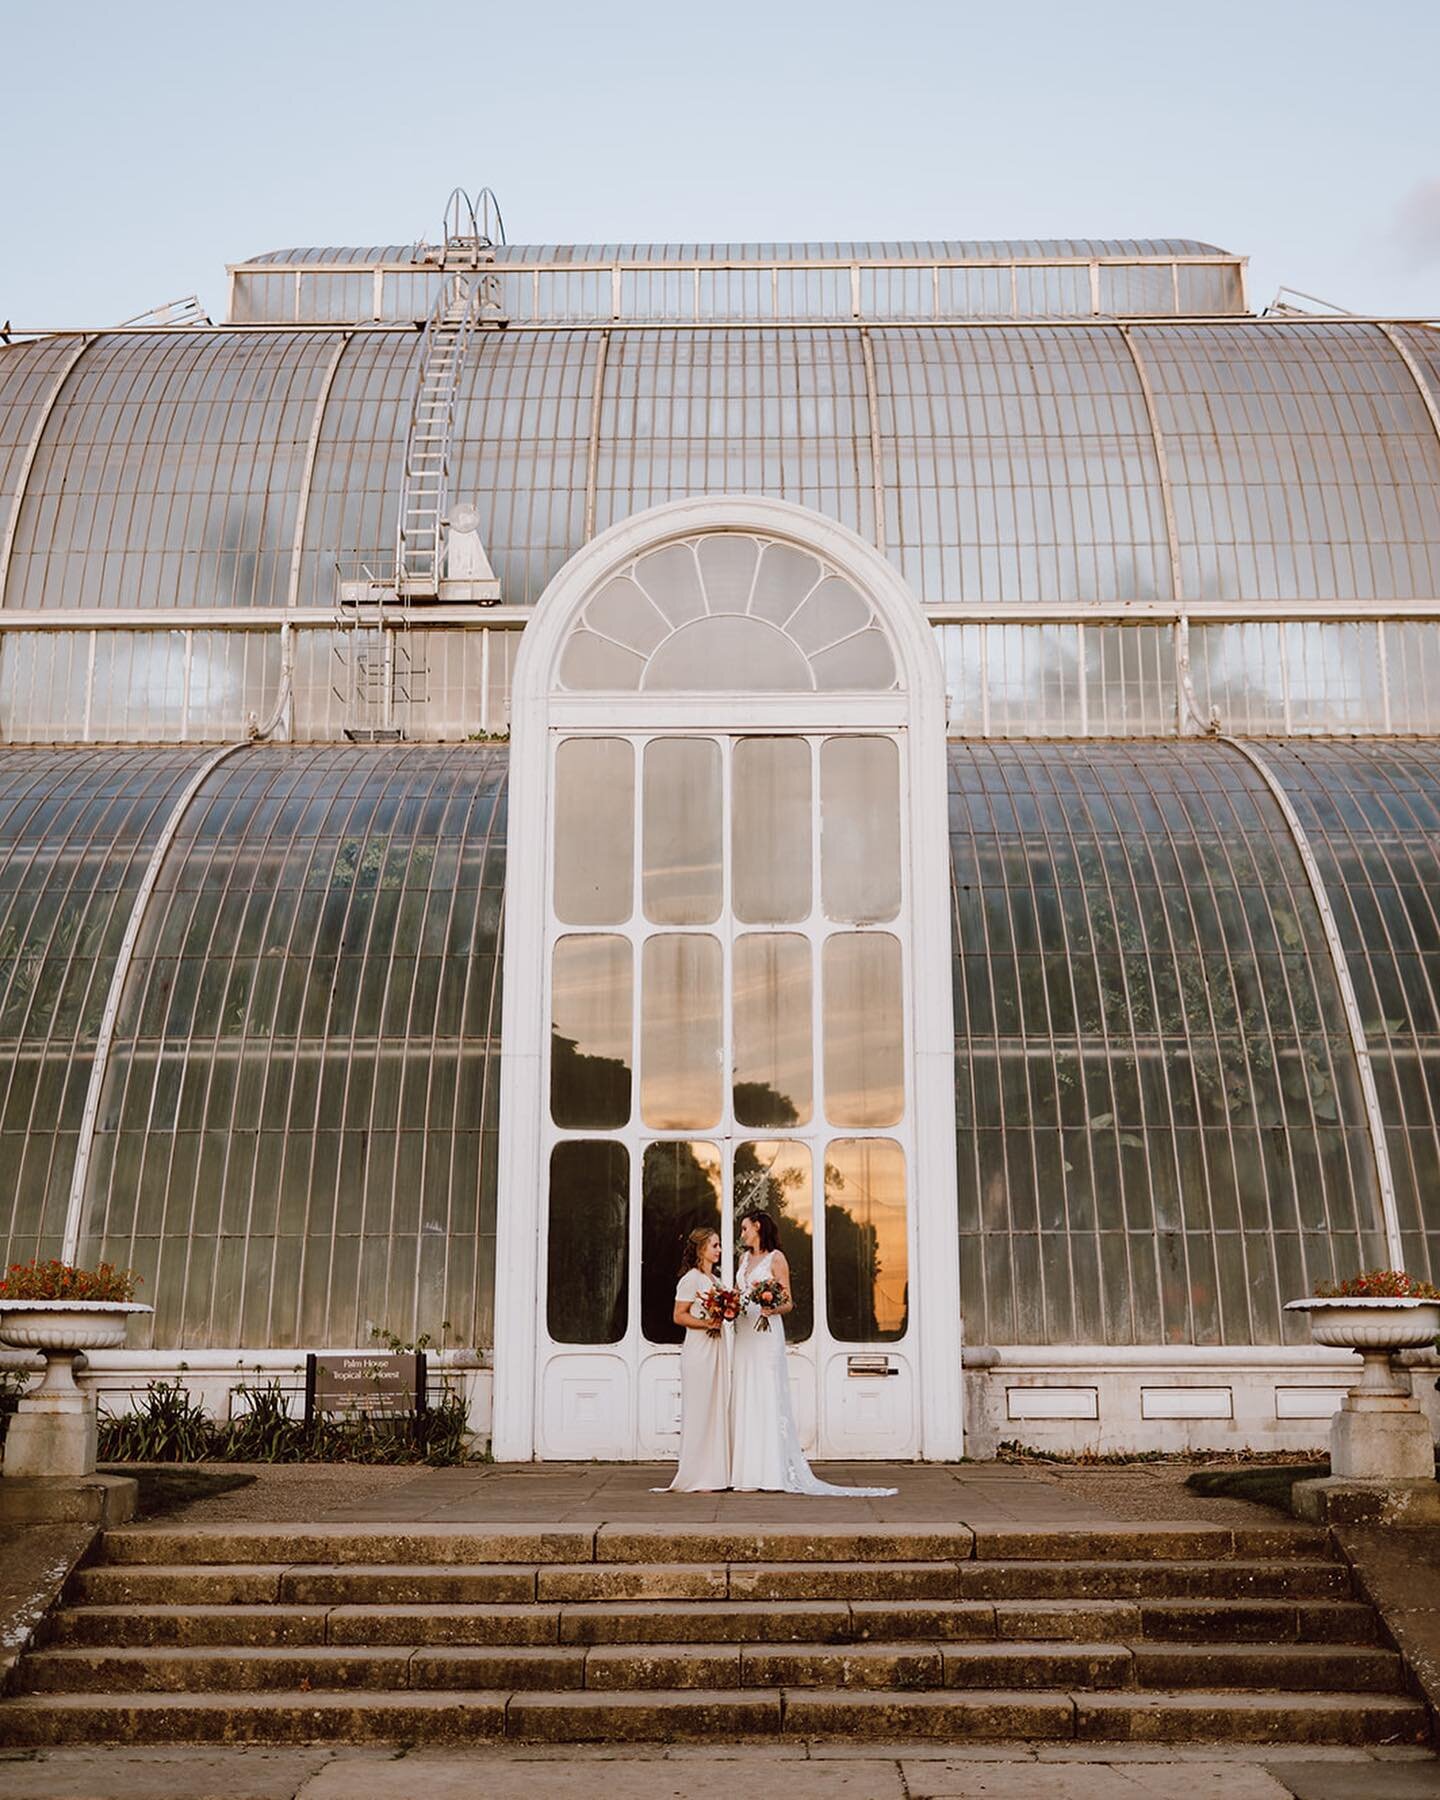 Golden hour moments with Georgia &amp; Alex at the Palm House, Kew Gardens. 

This will always be one of my favourite places to visit when photographing your @kewevents wedding. 

@kewgardens 
@maryjanevaughan 
@createfoodweddings 
@oxygen_events 
@p